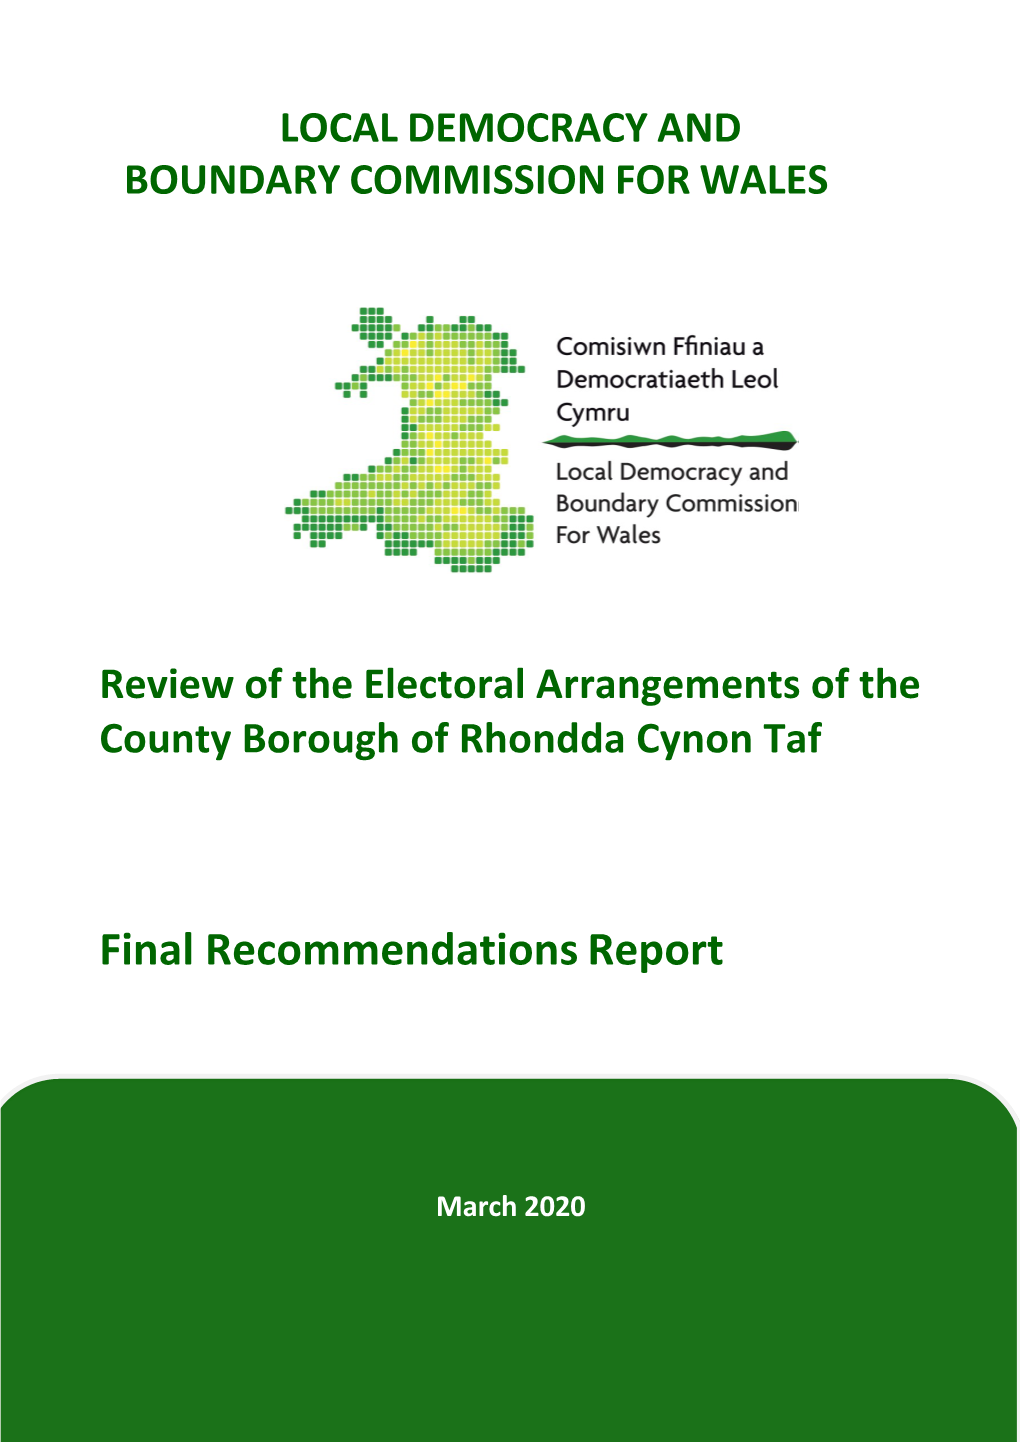 LOCAL DEMOCRACY and BOUNDARY COMMISSION for WALES Review of the Electoral Arrangements of the County Borough of Rhondda Cynon